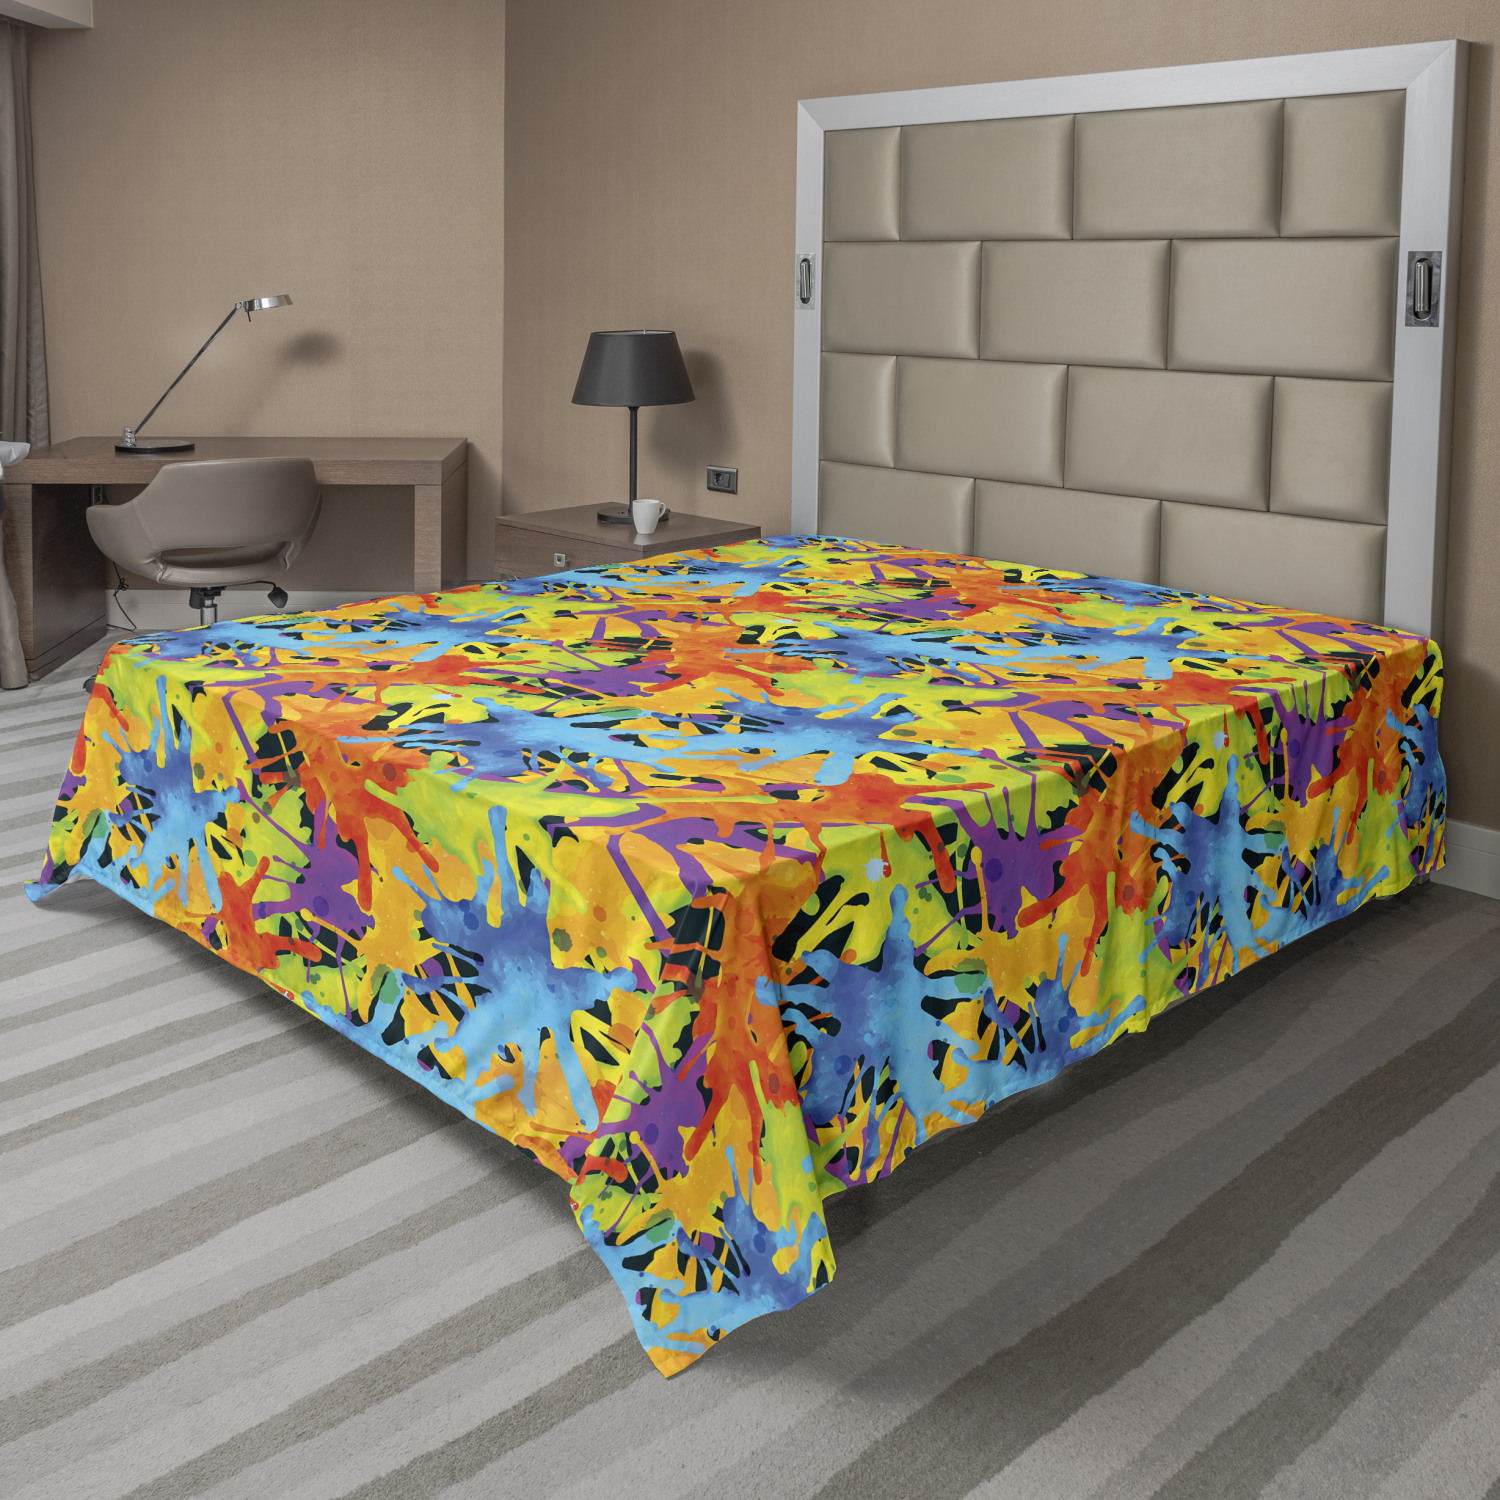 Details about   Ambesonne Abstract Ink Flat Sheet Top Sheet Decorative Bedding 6 Sizes 